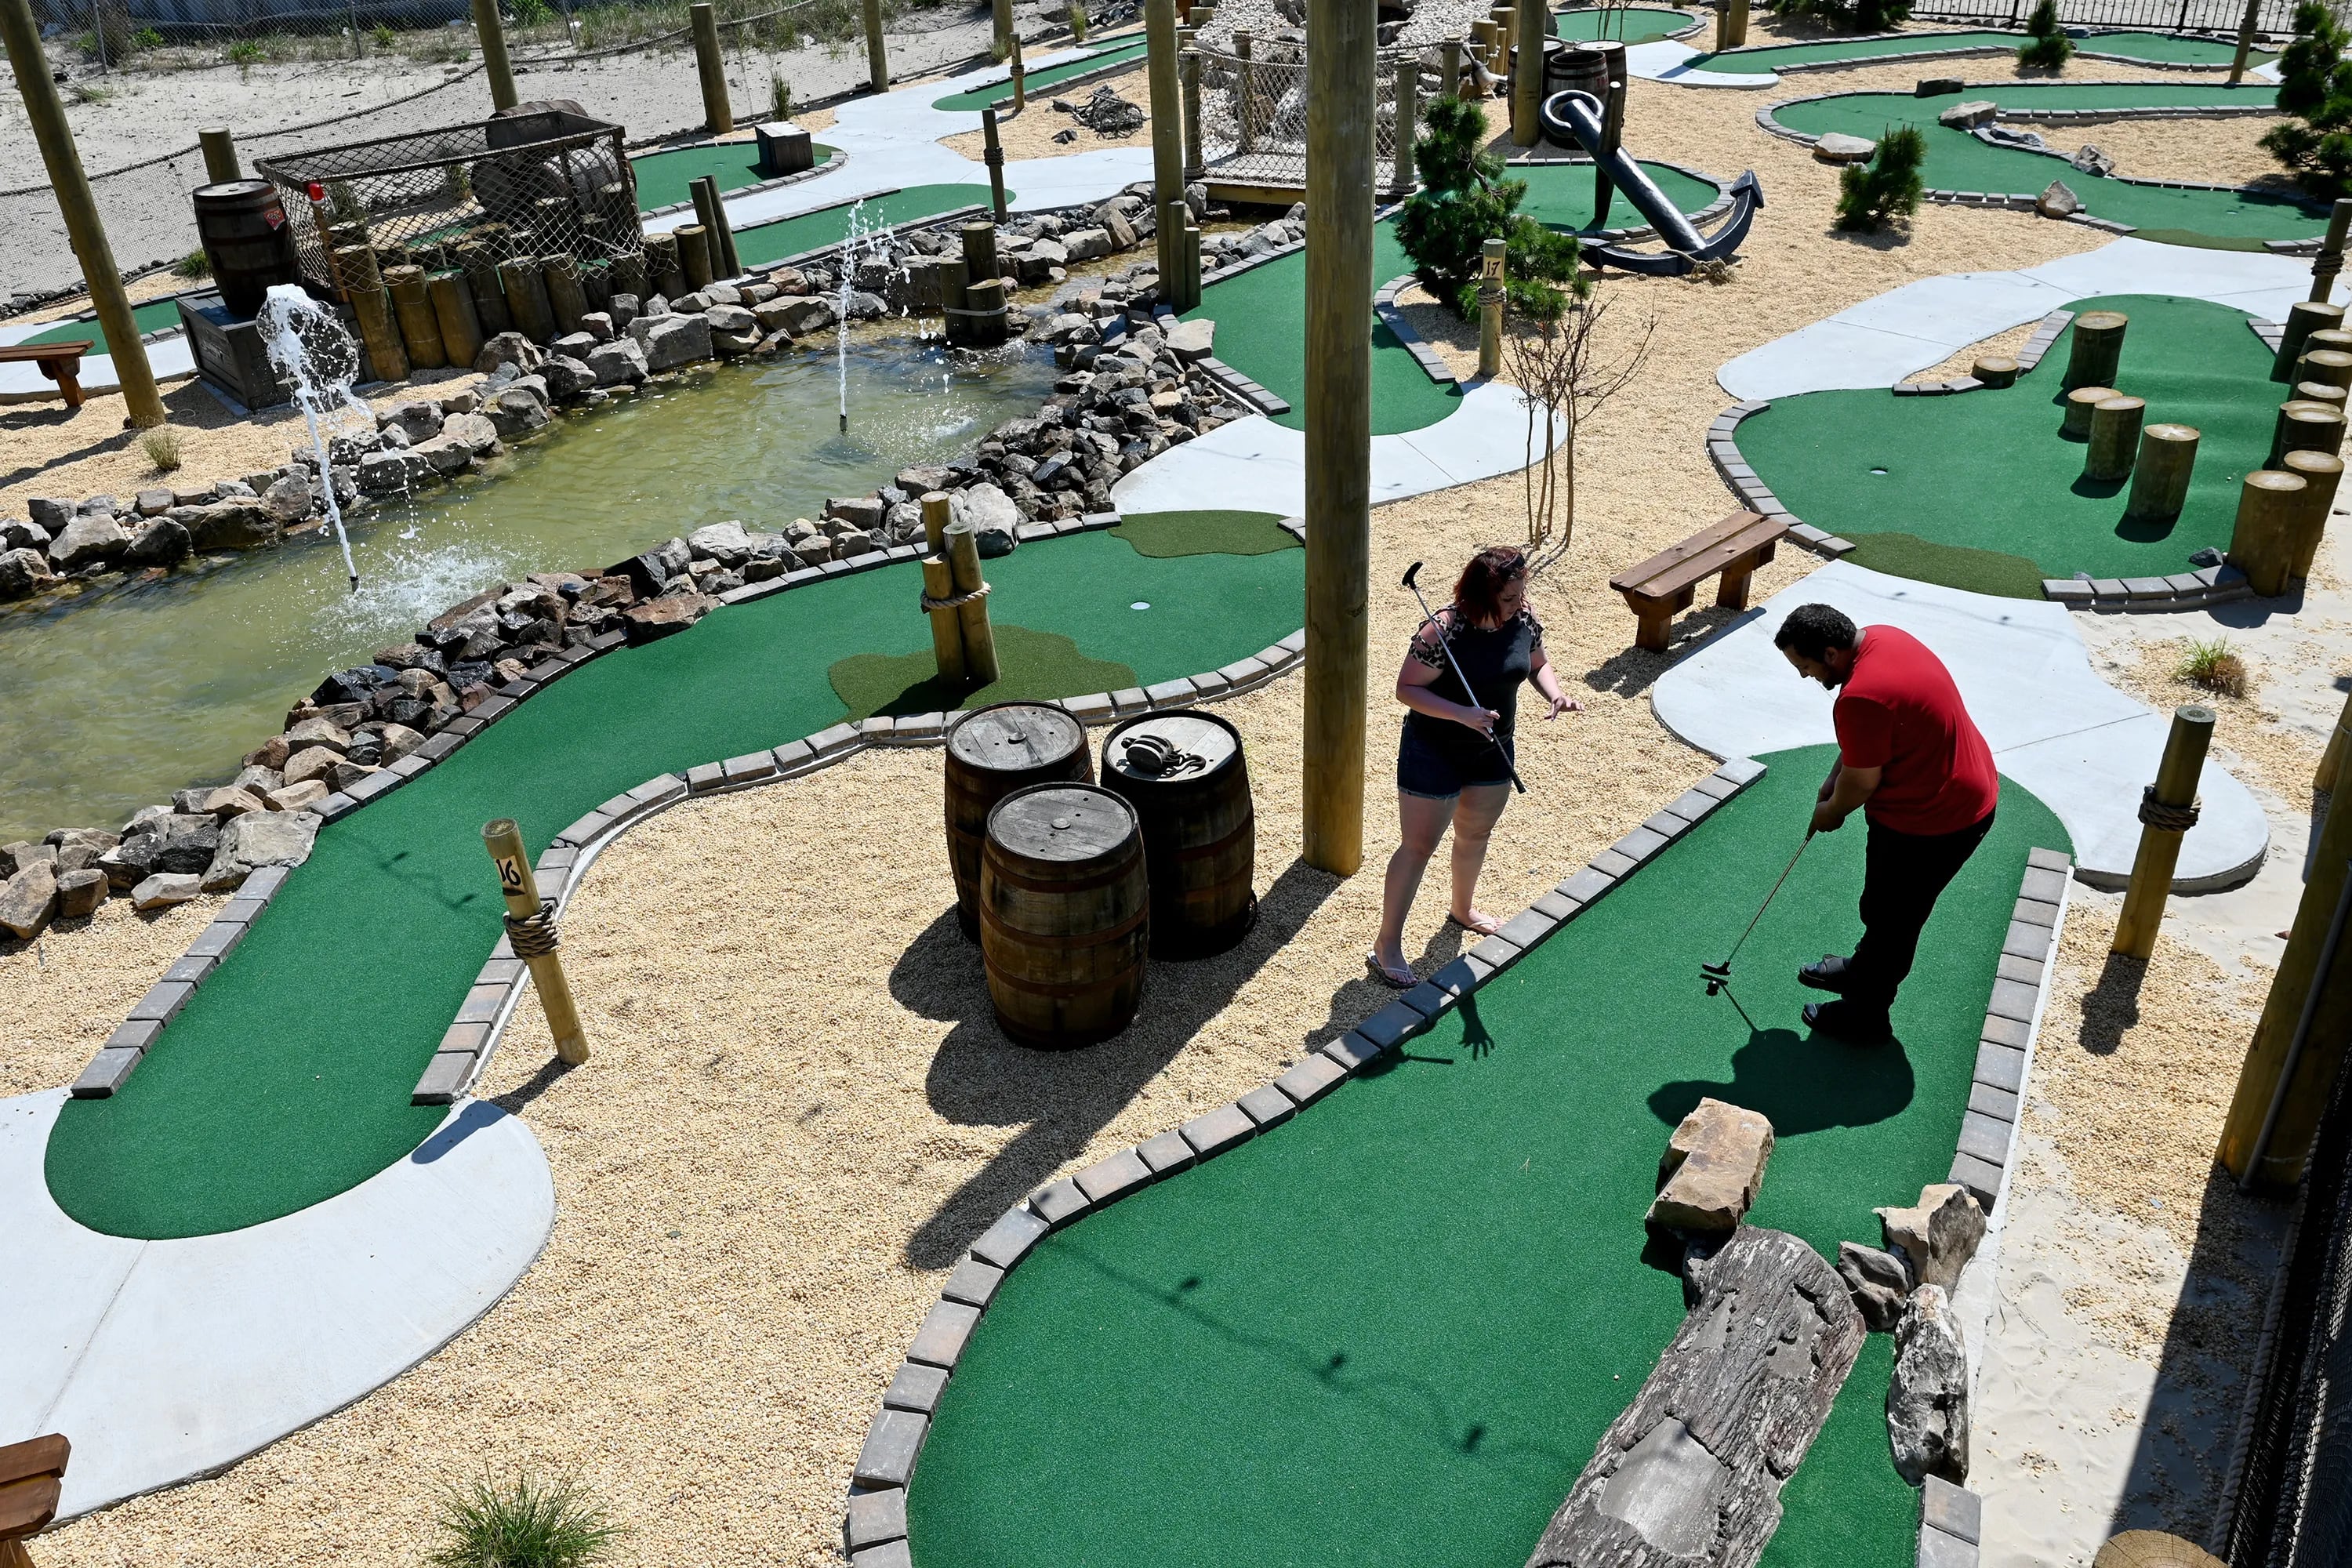 Catherine McCallister (left) of Little Egg Harbor and Jose Rivera (right) of Atlantic City play at North Beach Mini Golf in Atlantic City May 22, 2022, one of the best mini golf spots at the Shore.